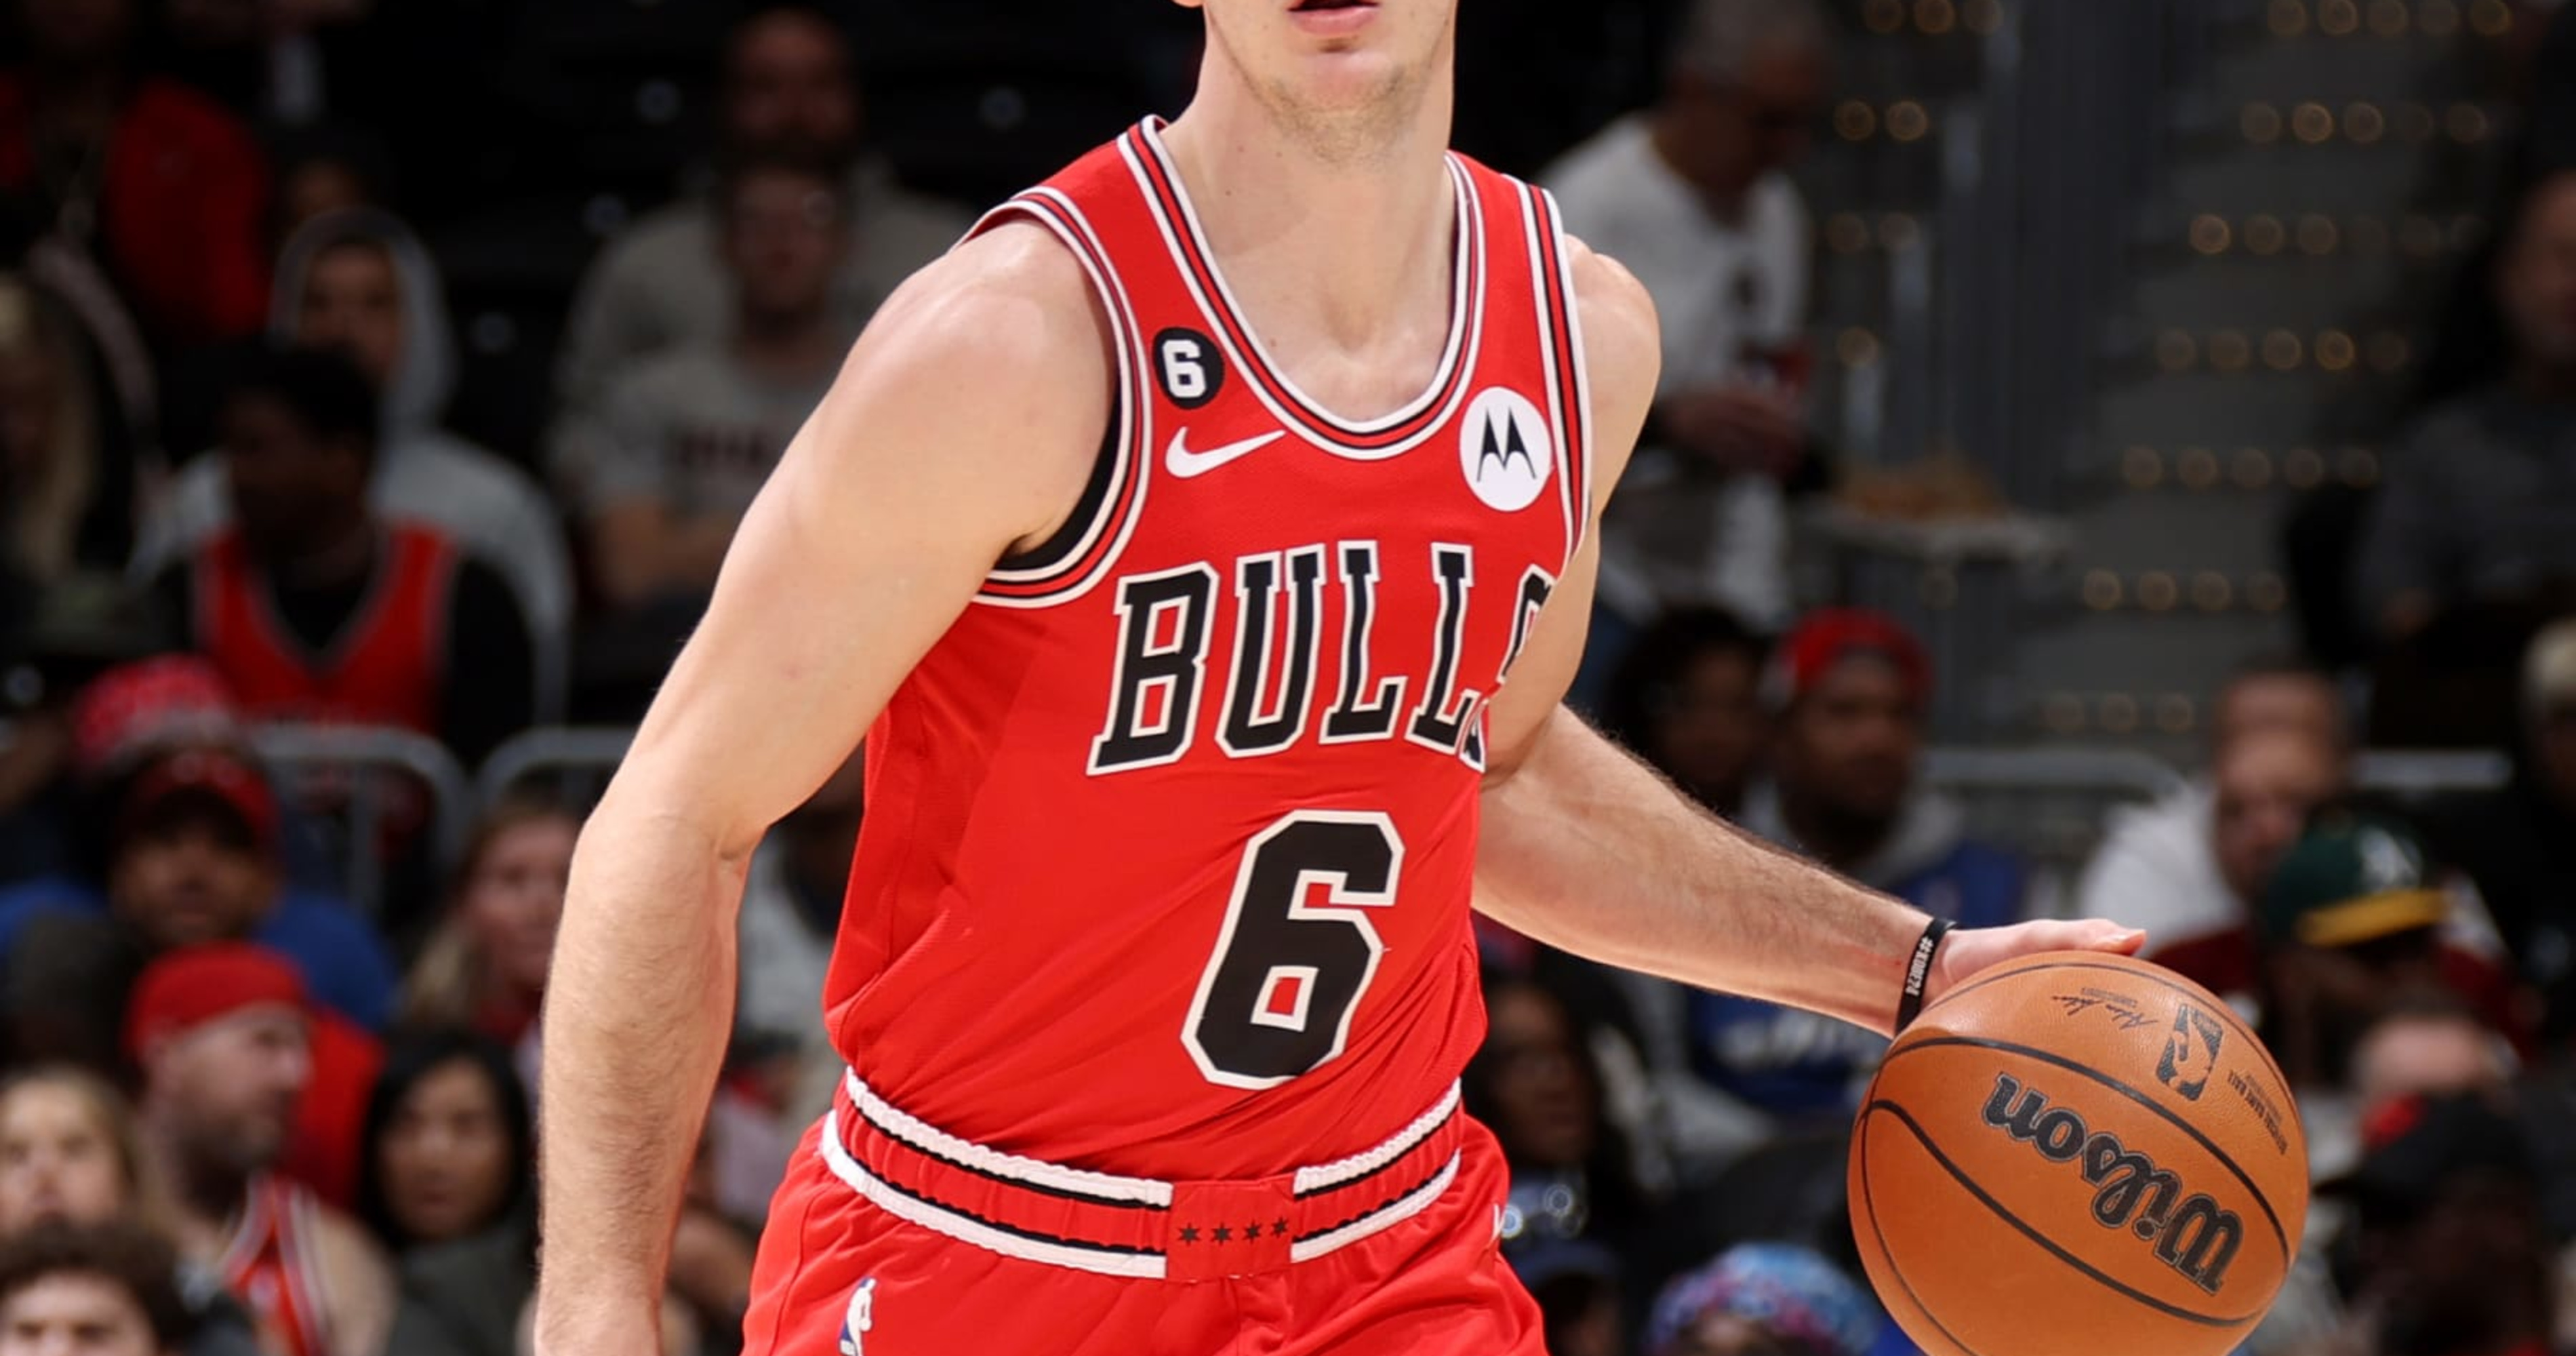 How good do you think Alex Caruso will be for the Bulls? - Quora